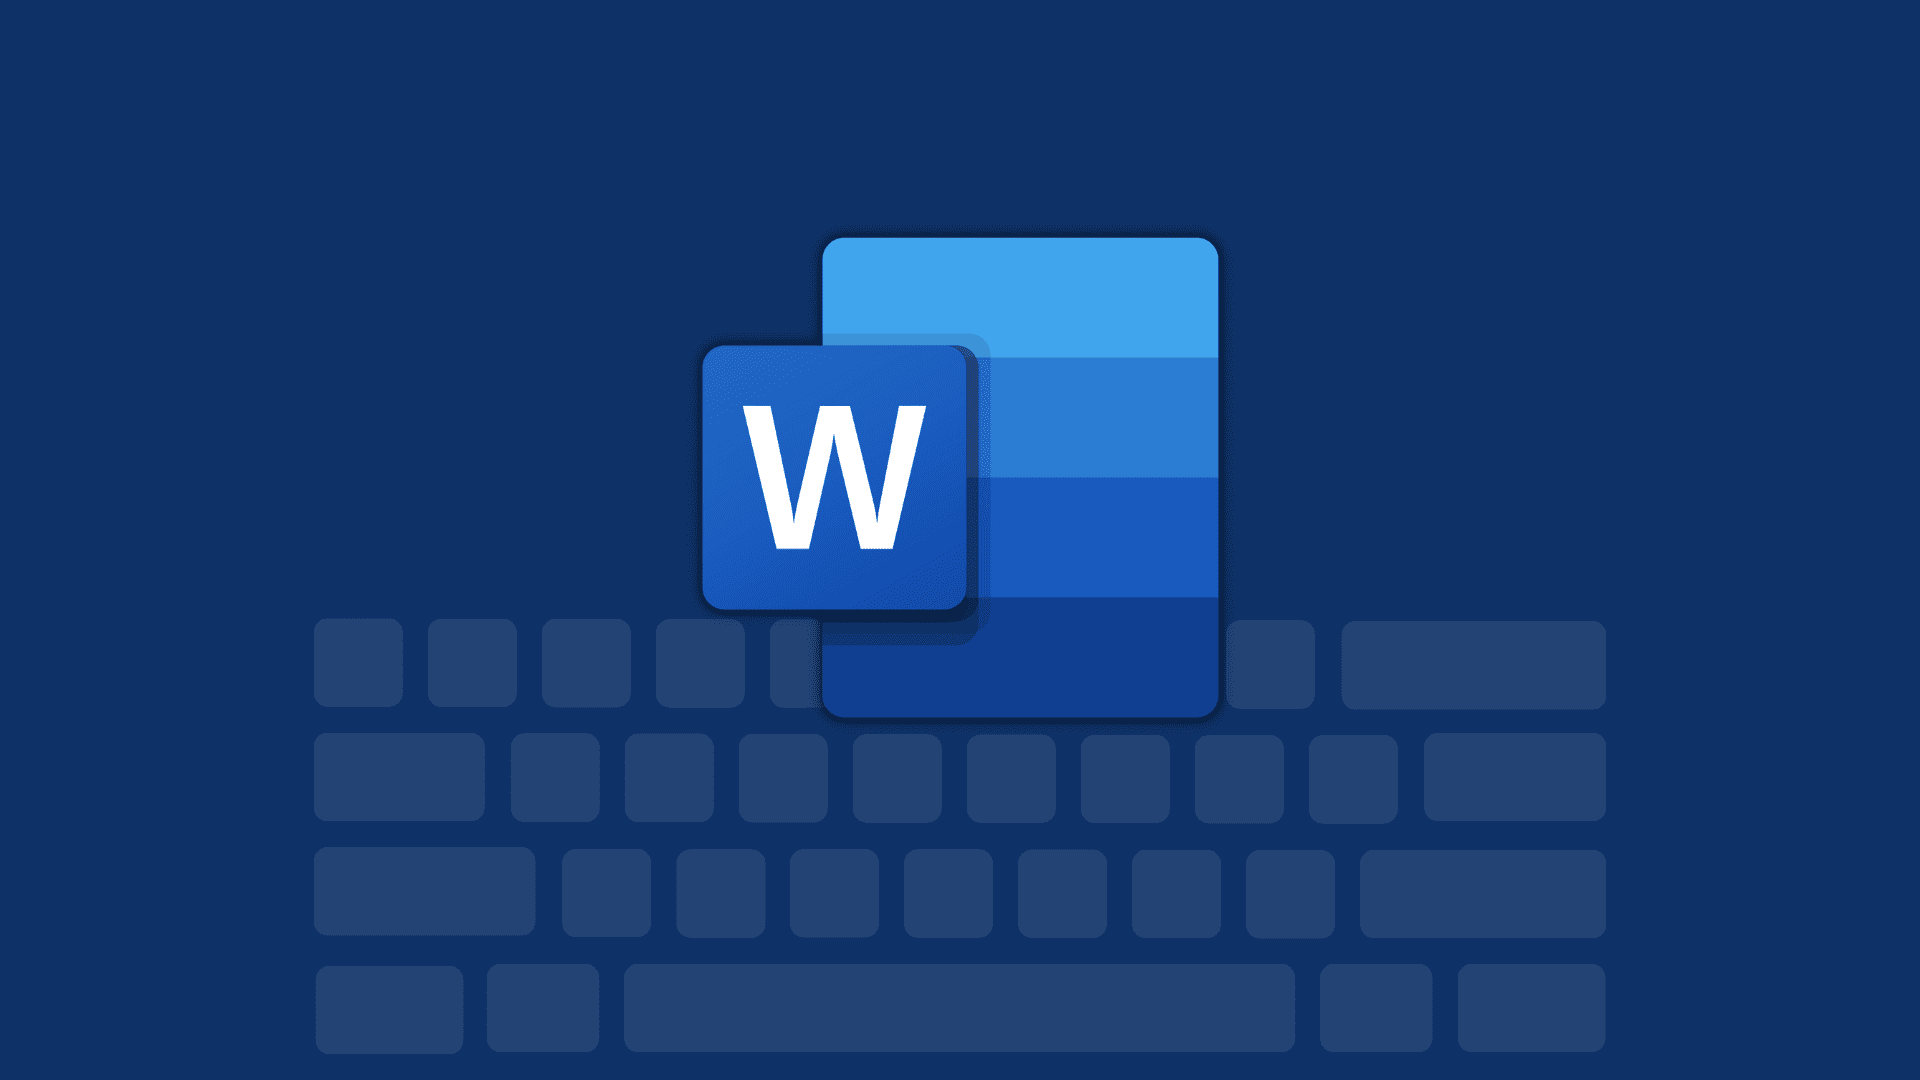 Microsoft Word logo on a dark background with a light keyboard outline